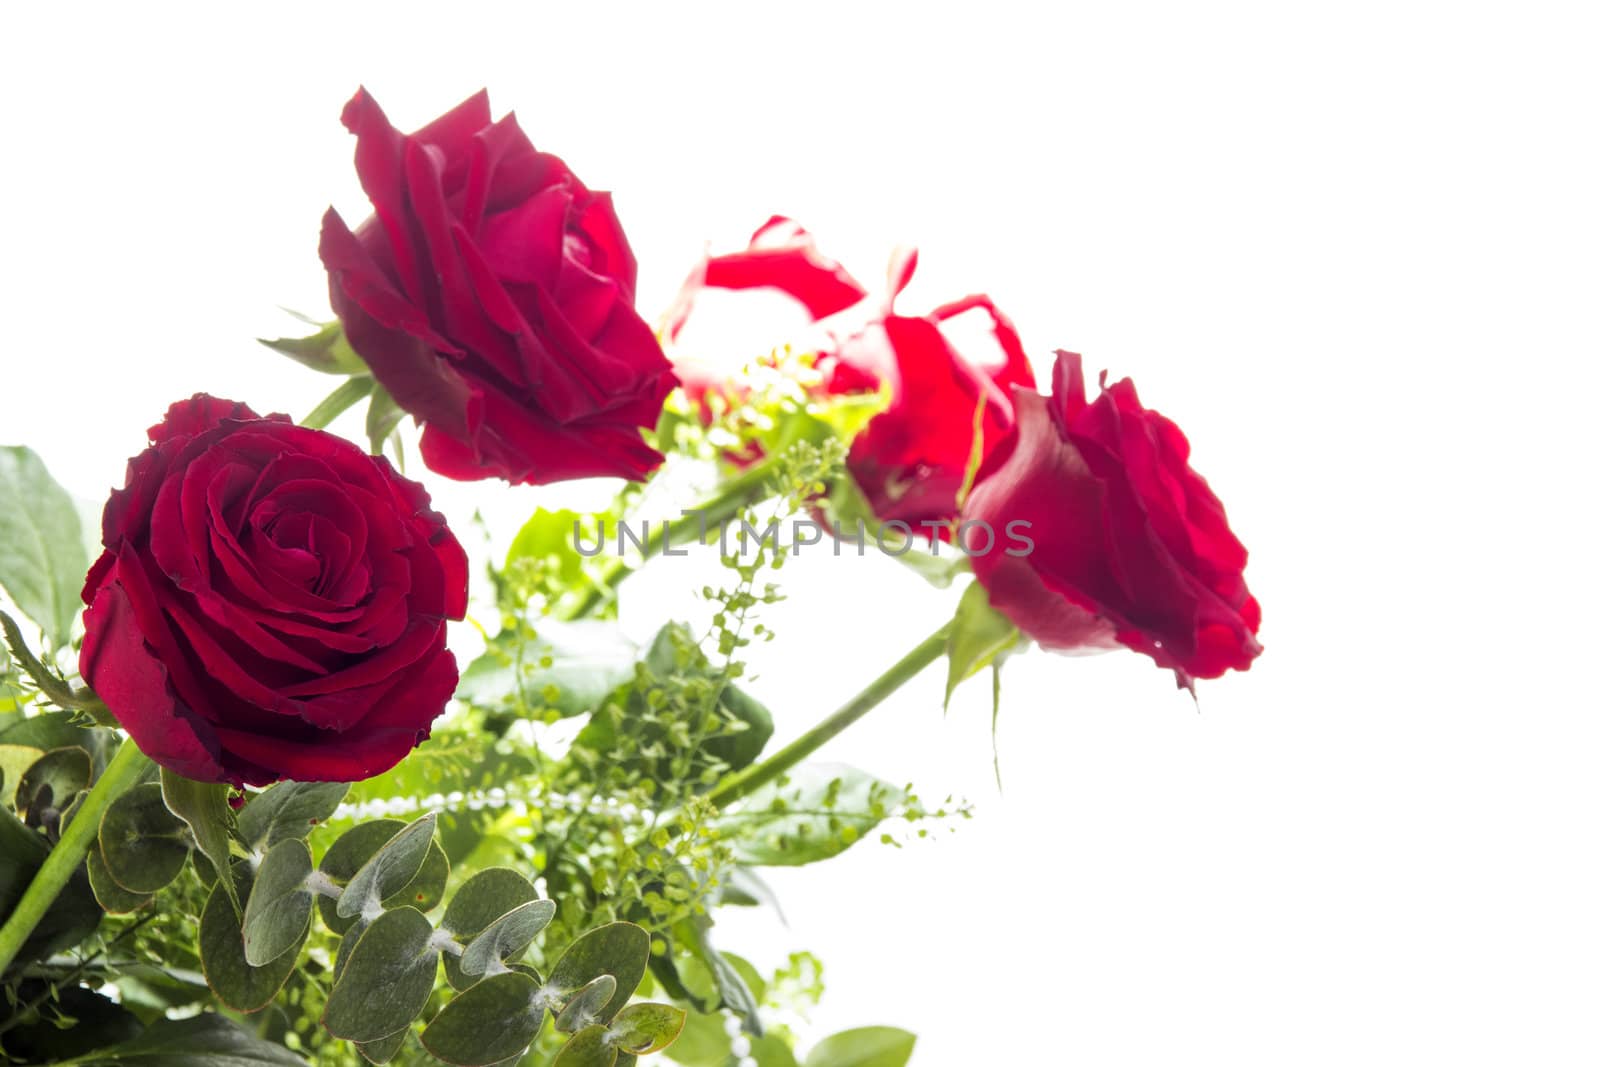 Gorgeous bouquet of red roses on a white background. Fragment.